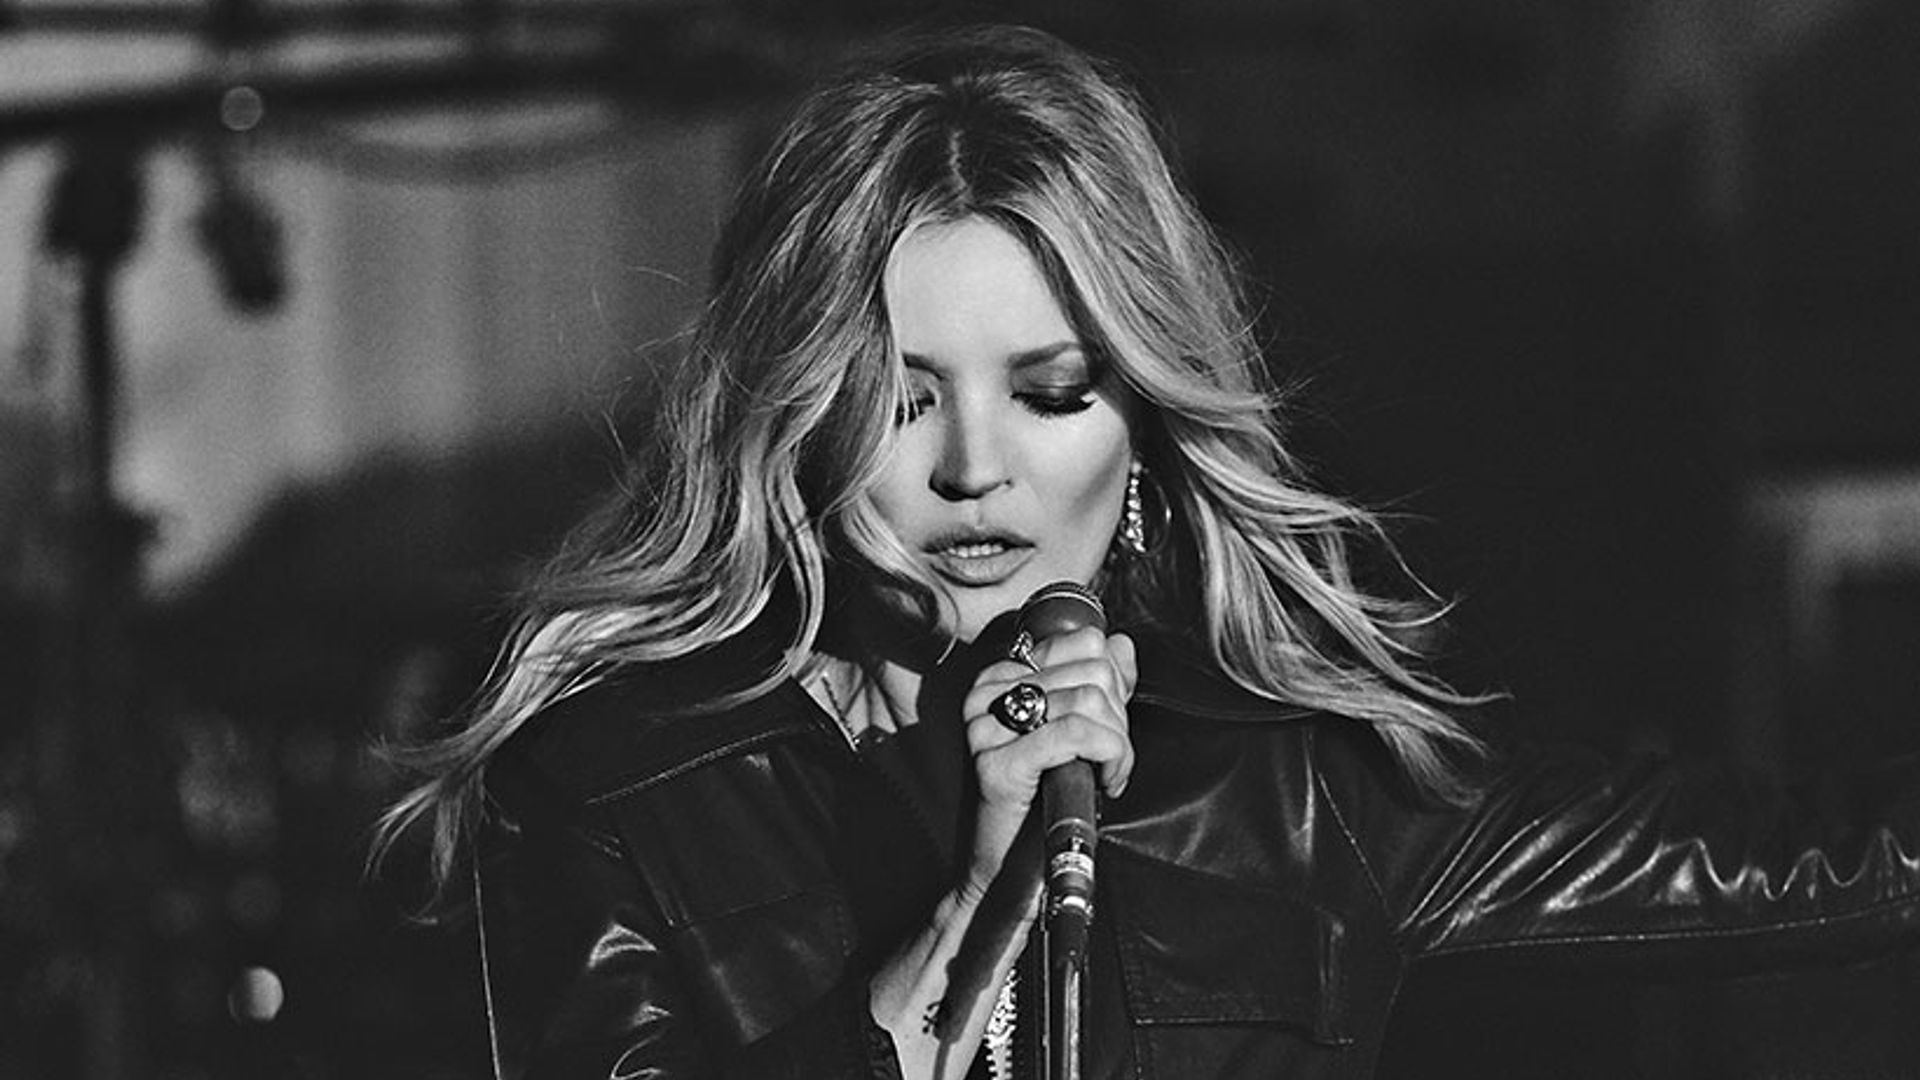 Kate Moss goes rock and roll in Elvis Presley's The Wonder of You video